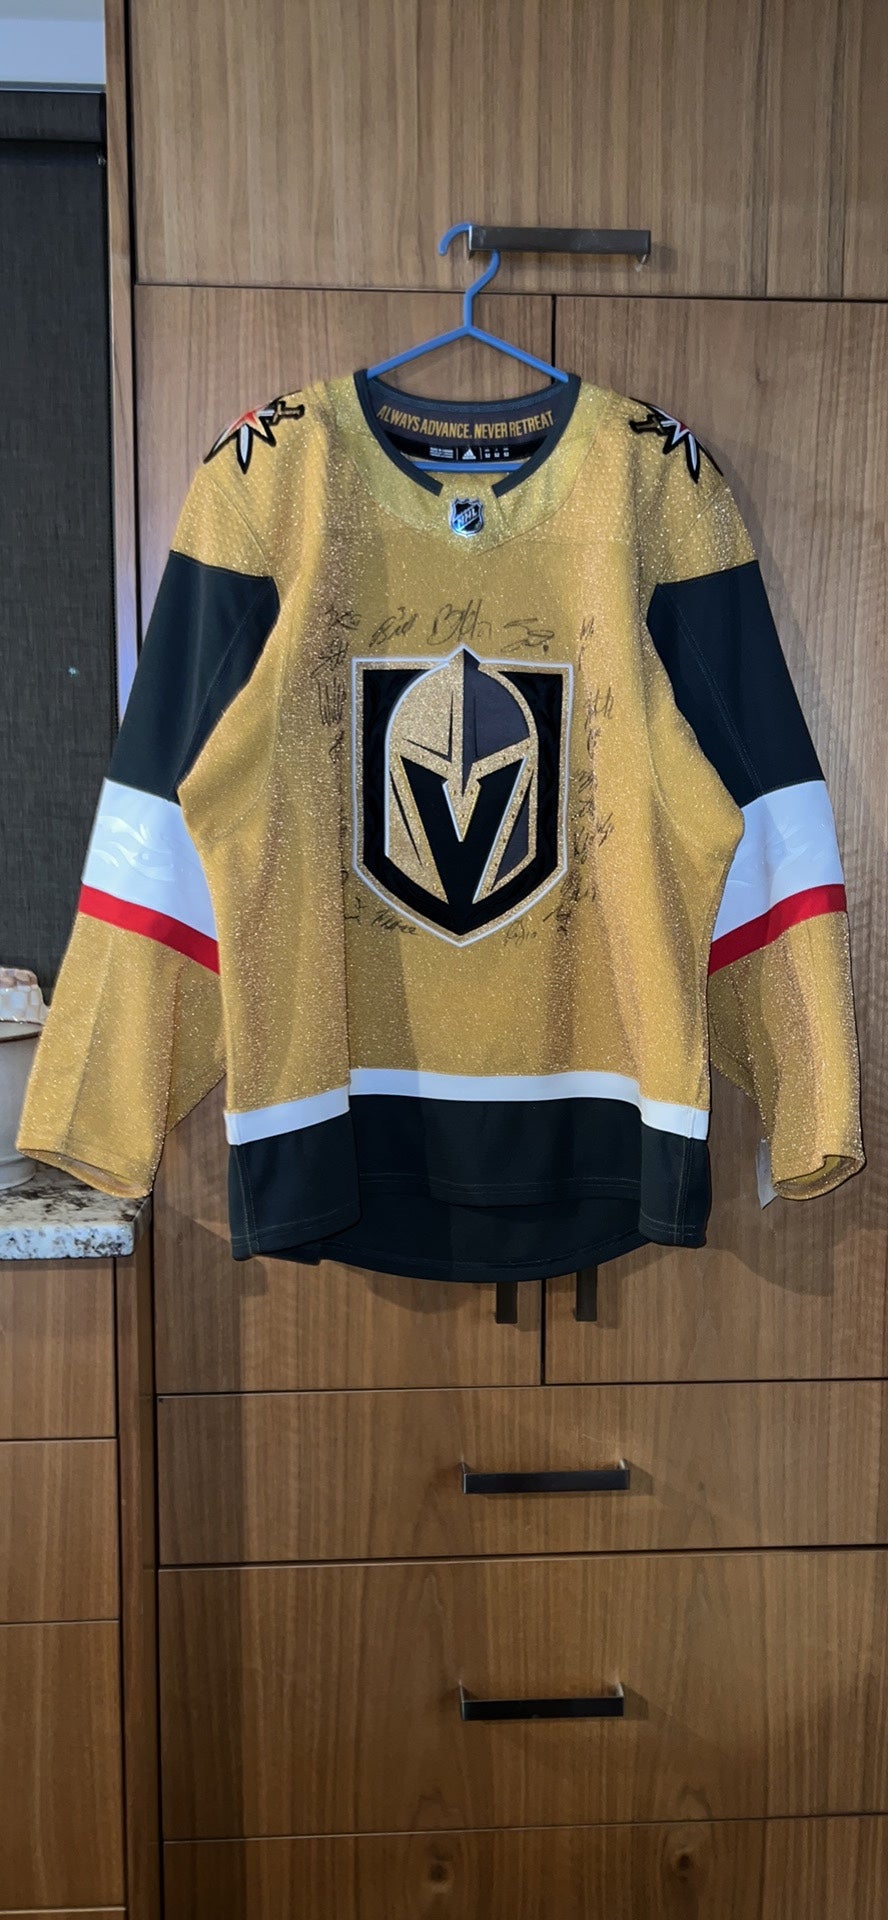 Golden Knights Jerseys Selling For $34.99 At Costco Sold Out In Few Days -  LVSportsBiz